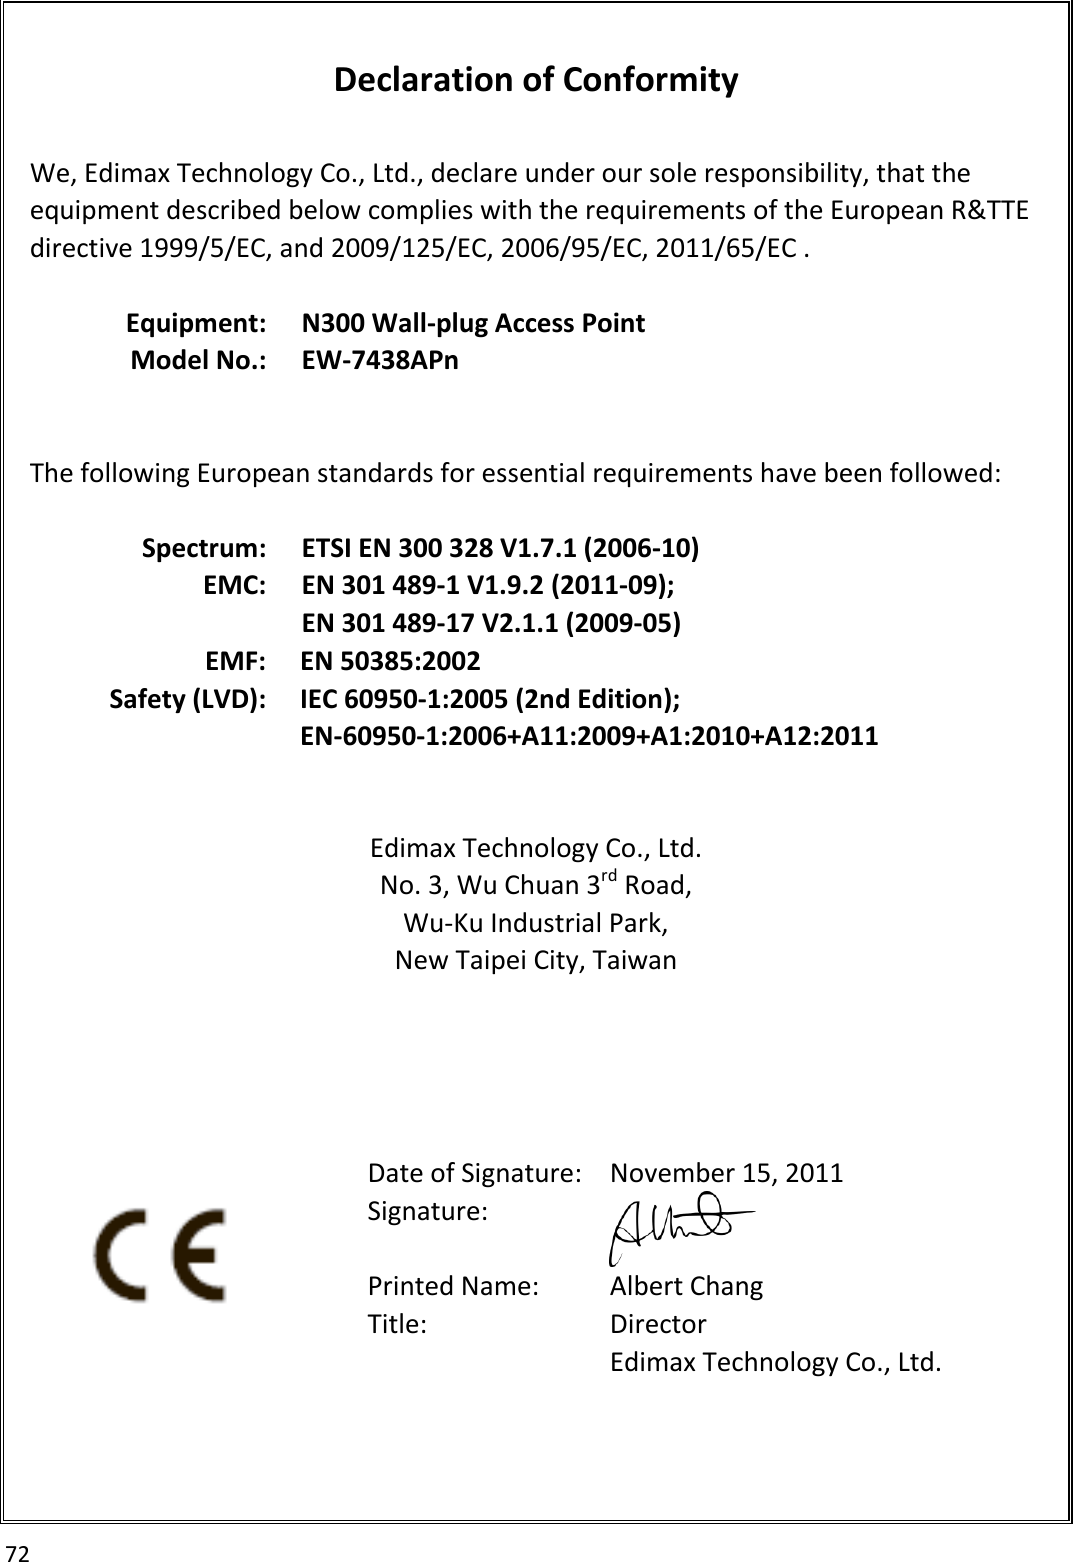 72   Declaration of Conformity  We, Edimax Technology Co., Ltd., declare under our sole responsibility, that the equipment described below complies with the requirements of the European R&amp;TTE directive 1999/5/EC, and 2009/125/EC, 2006/95/EC, 2011/65/EC .  Equipment: N300 Wall-plug Access Point Model No.: EW-7438APn    The following European standards for essential requirements have been followed:  Spectrum: ETSI EN 300 328 V1.7.1 (2006-10) EMC: EN 301 489-1 V1.9.2 (2011-09); EN 301 489-17 V2.1.1 (2009-05) EMF: EN 50385:2002 Safety (LVD): IEC 60950-1:2005 (2nd Edition); EN-60950-1:2006+A11:2009+A1:2010+A12:2011   Edimax Technology Co., Ltd. No. 3, Wu Chuan 3rd Road, Wu-Ku Industrial Park, New Taipei City, Taiwan          Date of Signature: November 15, 2011 Signature:  Printed Name: Albert Chang Title: Director Edimax Technology Co., Ltd.  